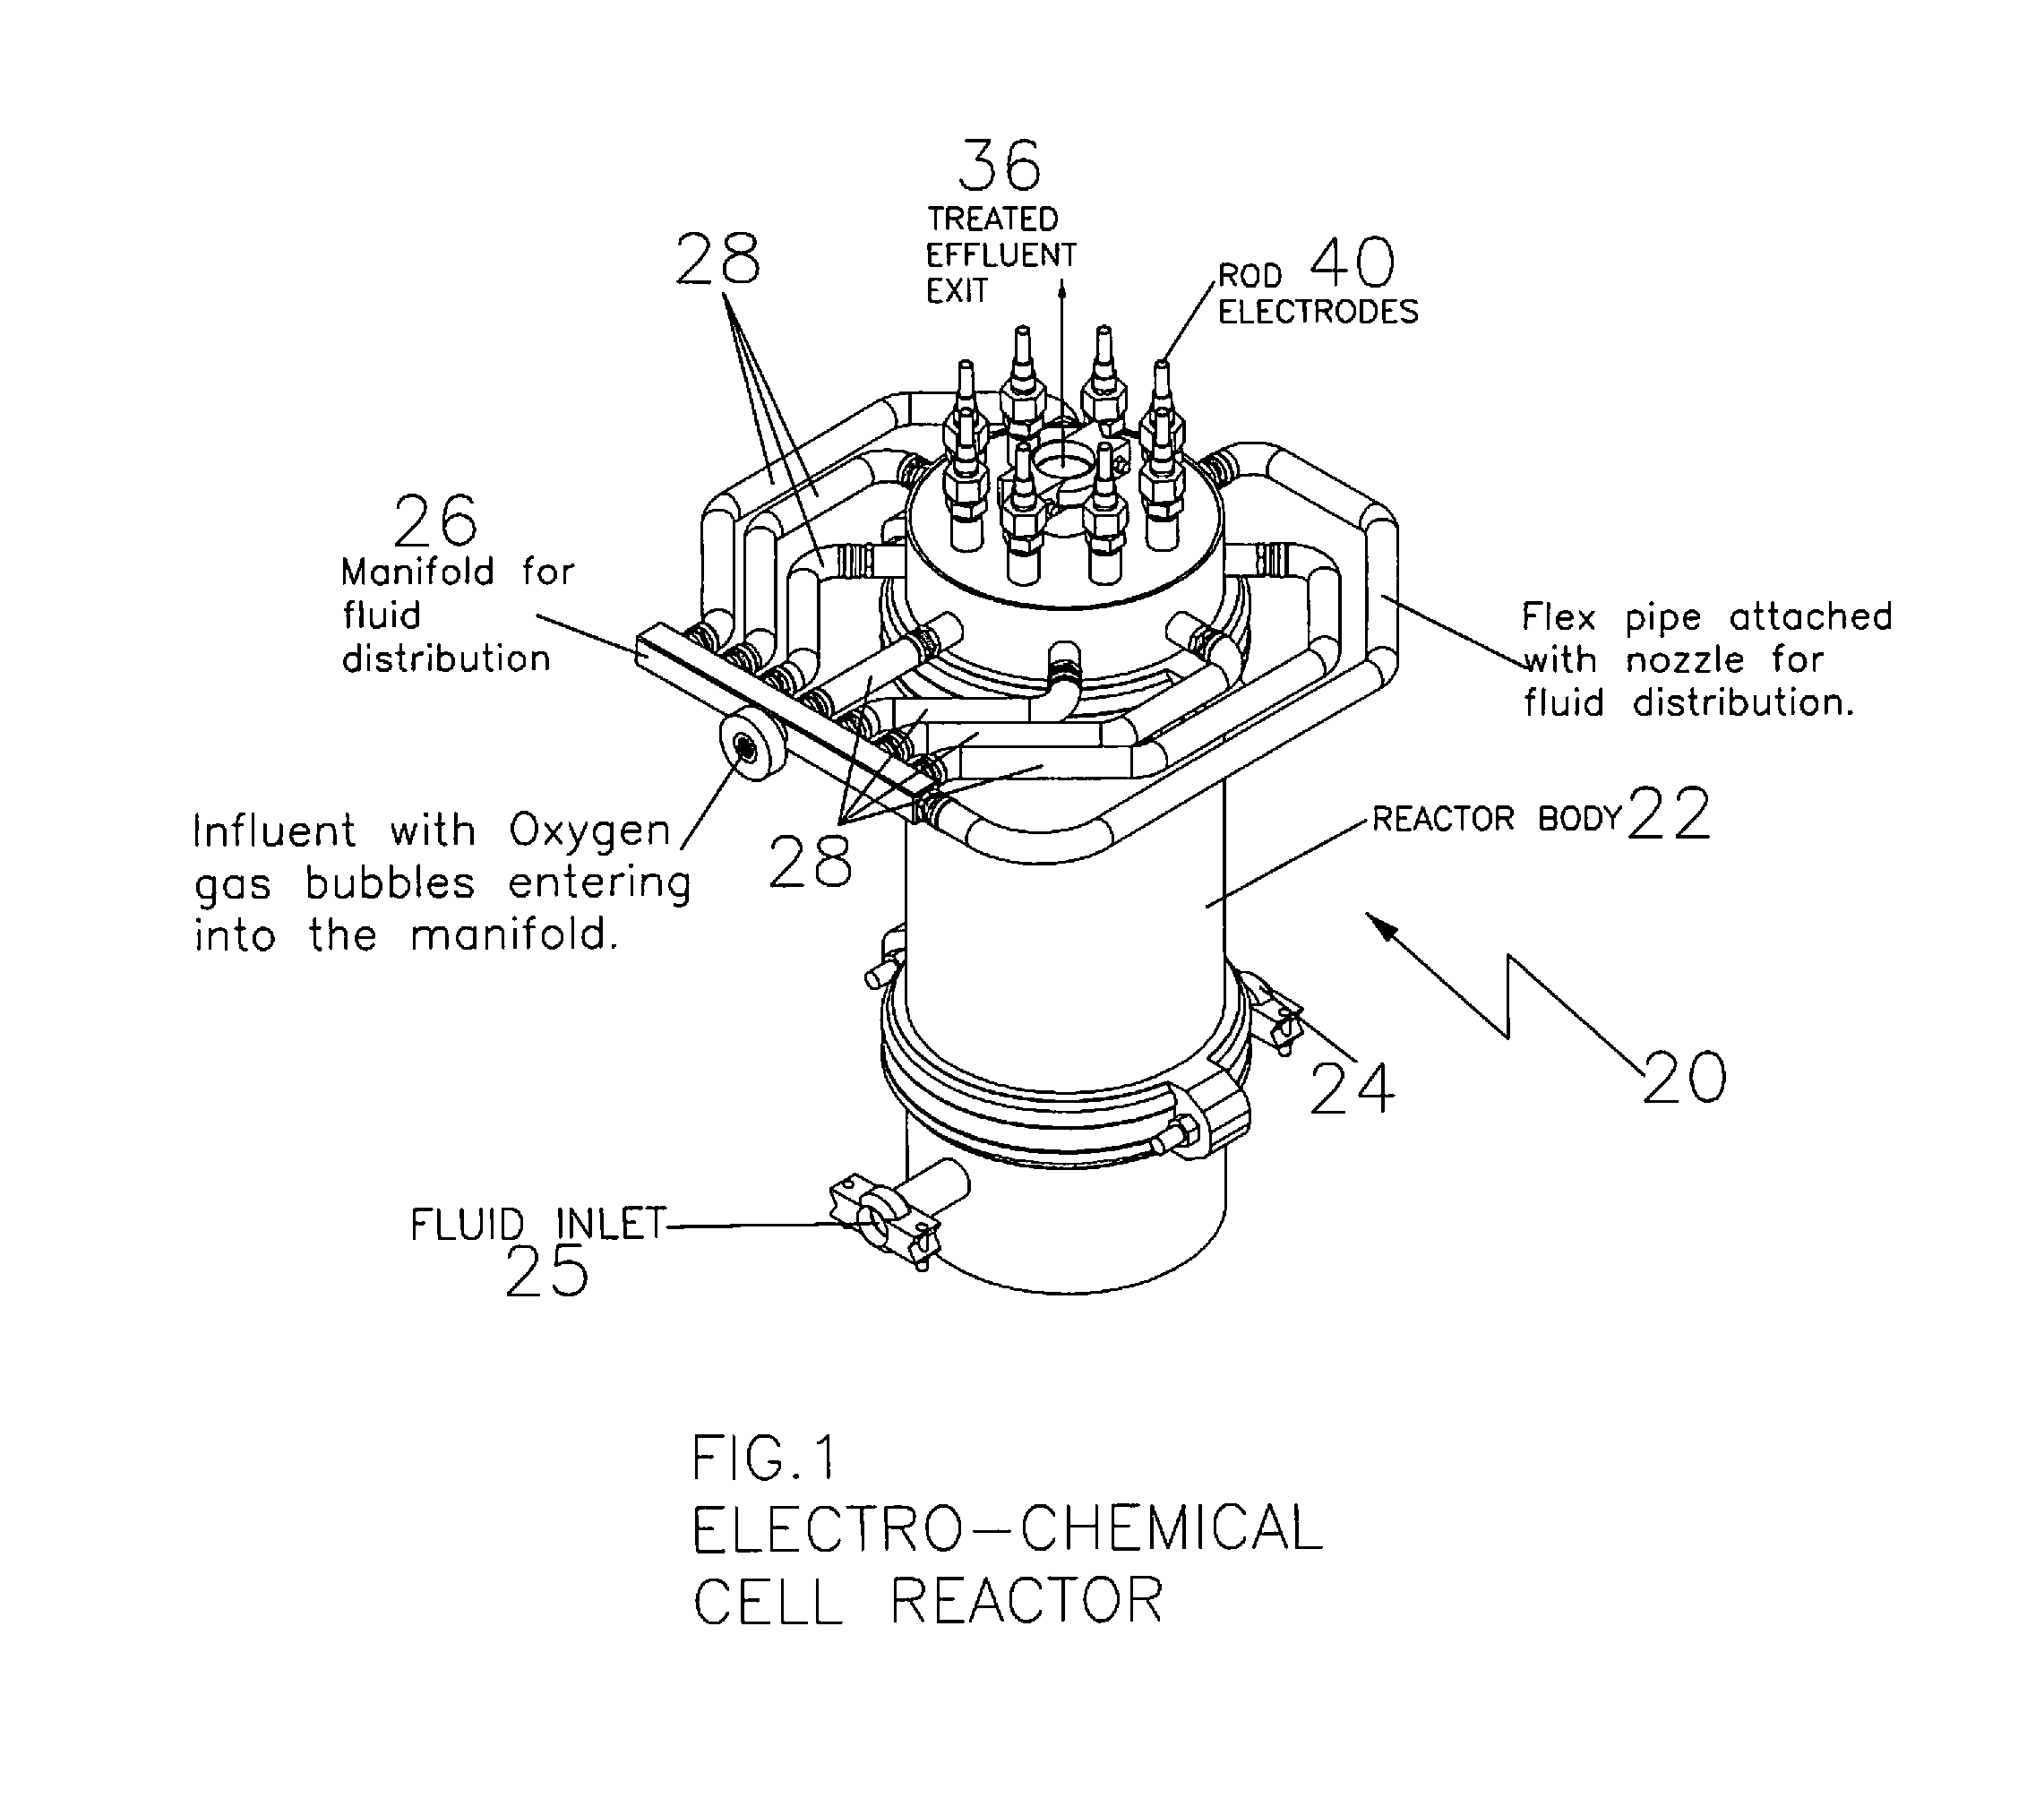 Electrolytic cell with advanced oxidation process and electro catalytic paddle electrode